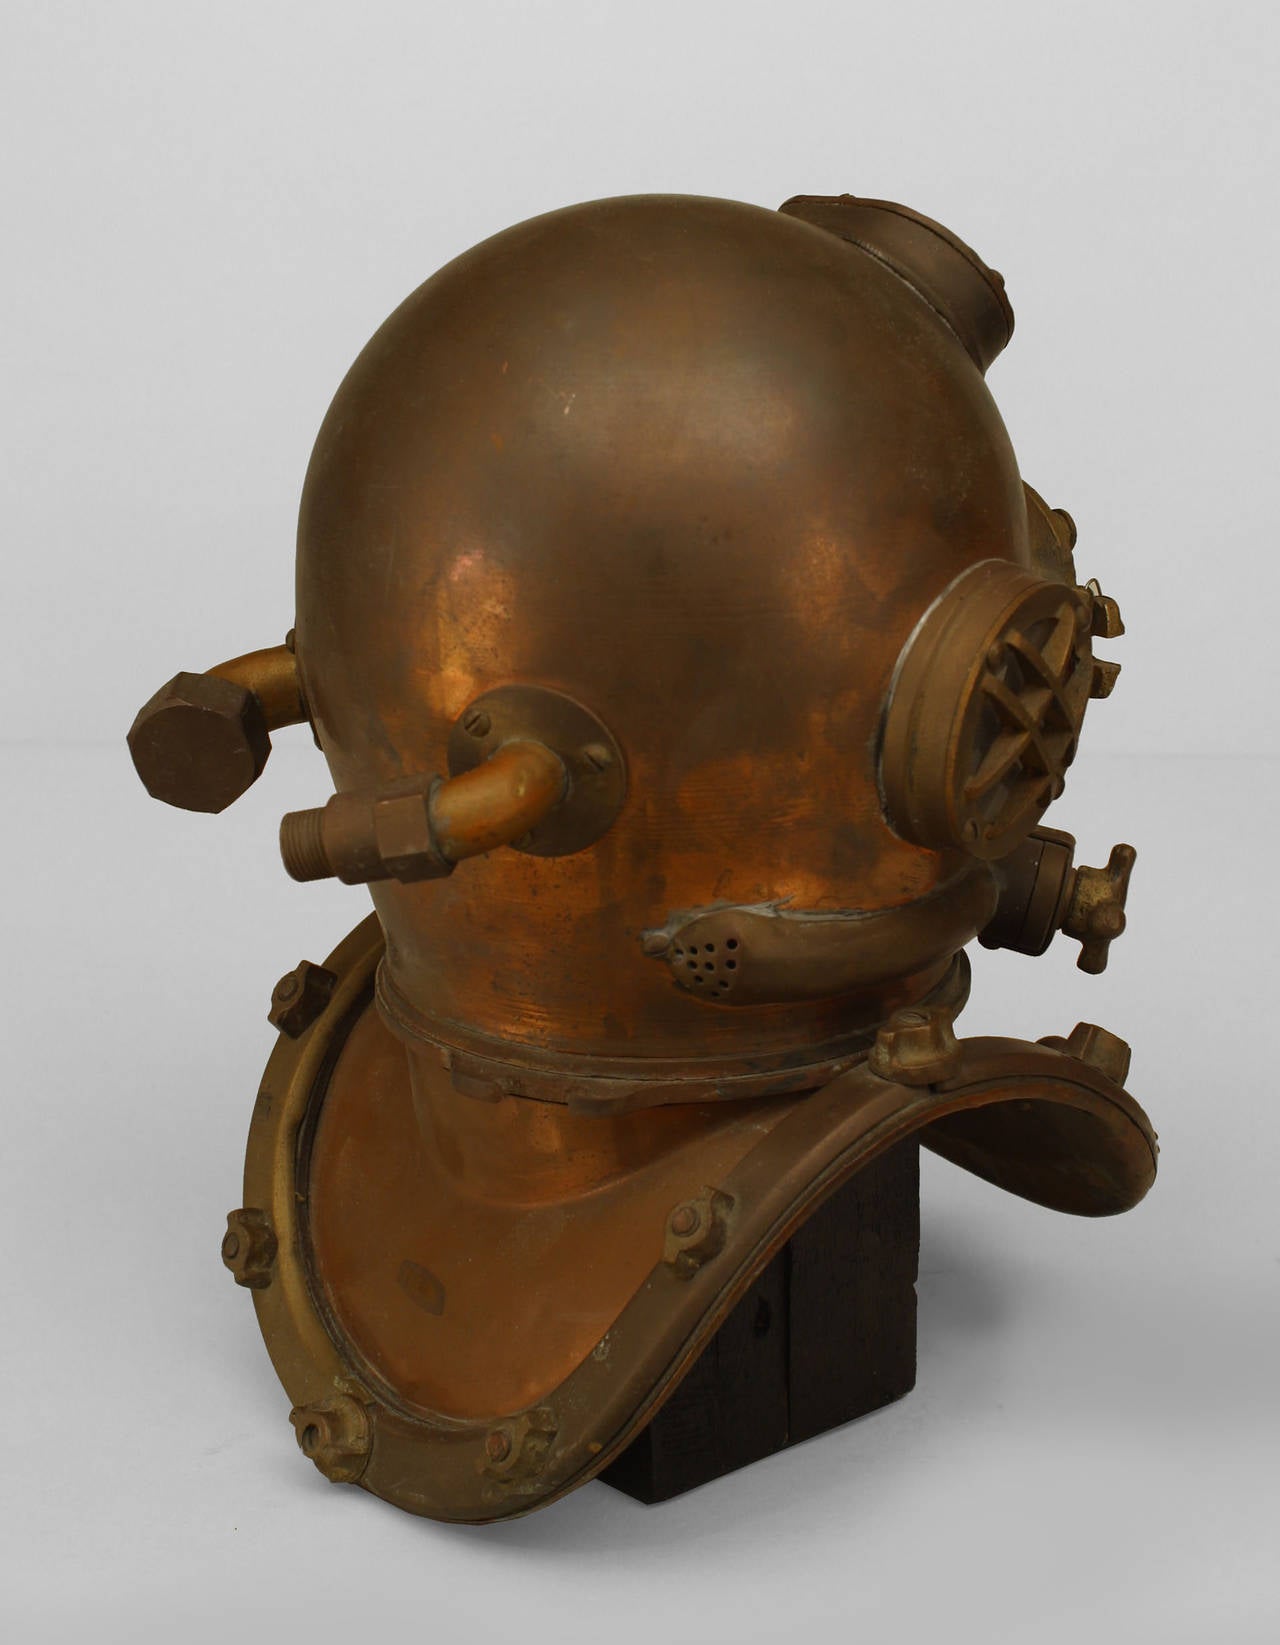 Early 20th American copper and brass model of a diver's helmet mounted on a wood base. 1/2 Scale model